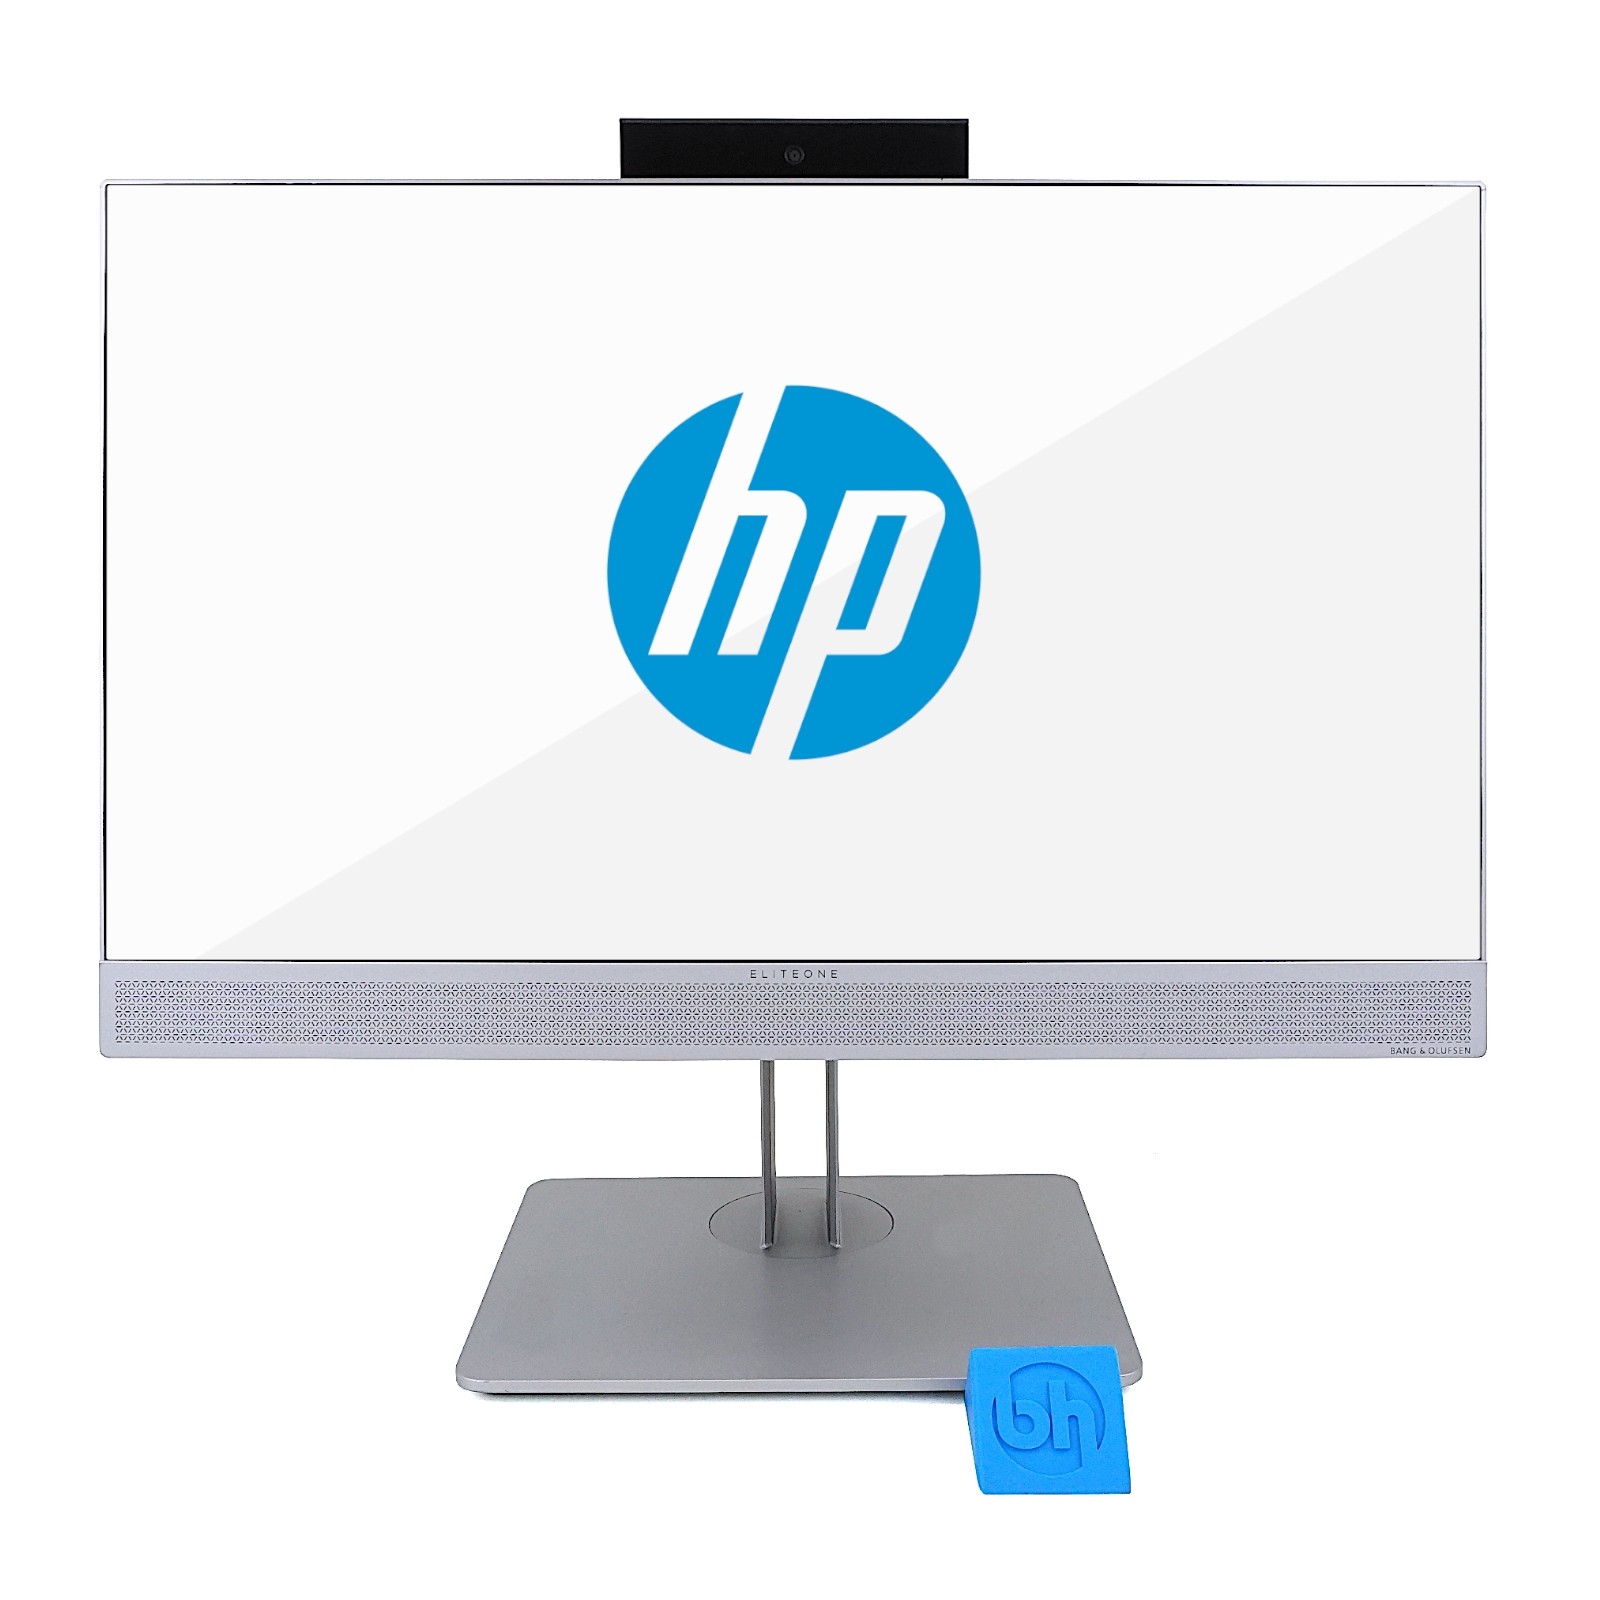 HP EliteOne 800 G3 23.8 Inch All-in-One AIO Touchscreen Desktop PC Front